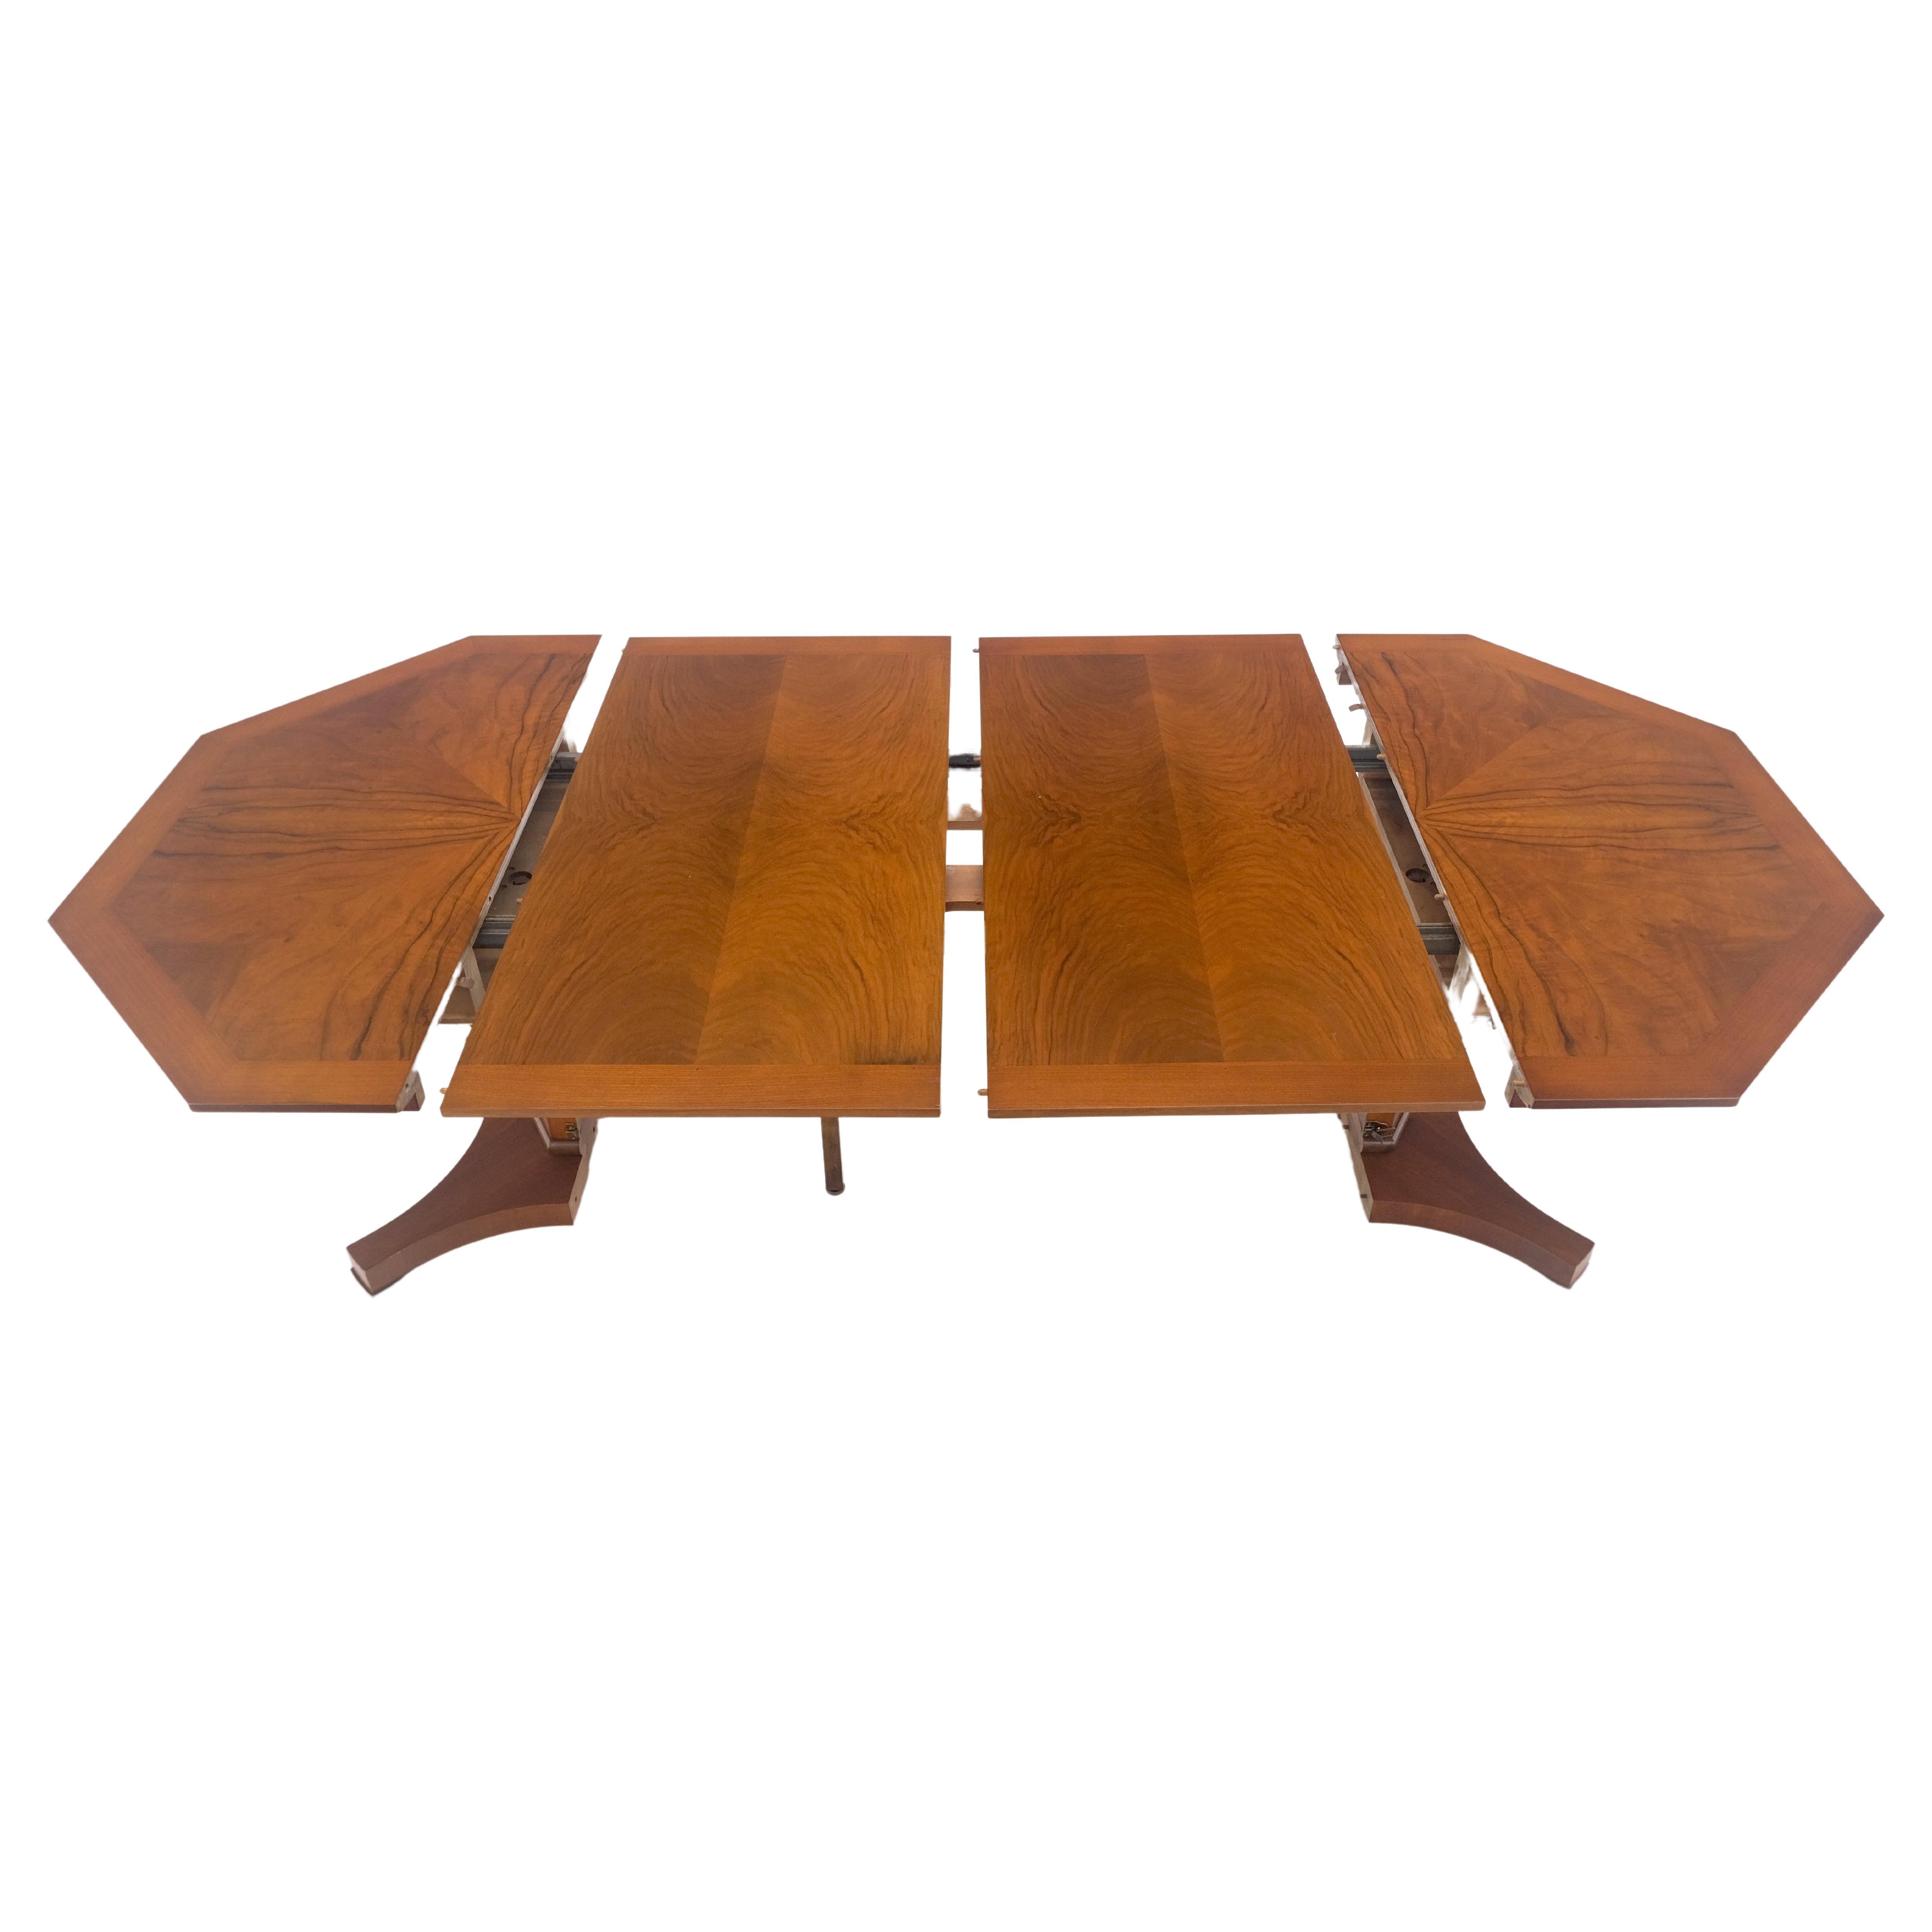 Baker LIght Walnut Round Octagon Single Base Two Leaves Dining Room Table Mint! For Sale